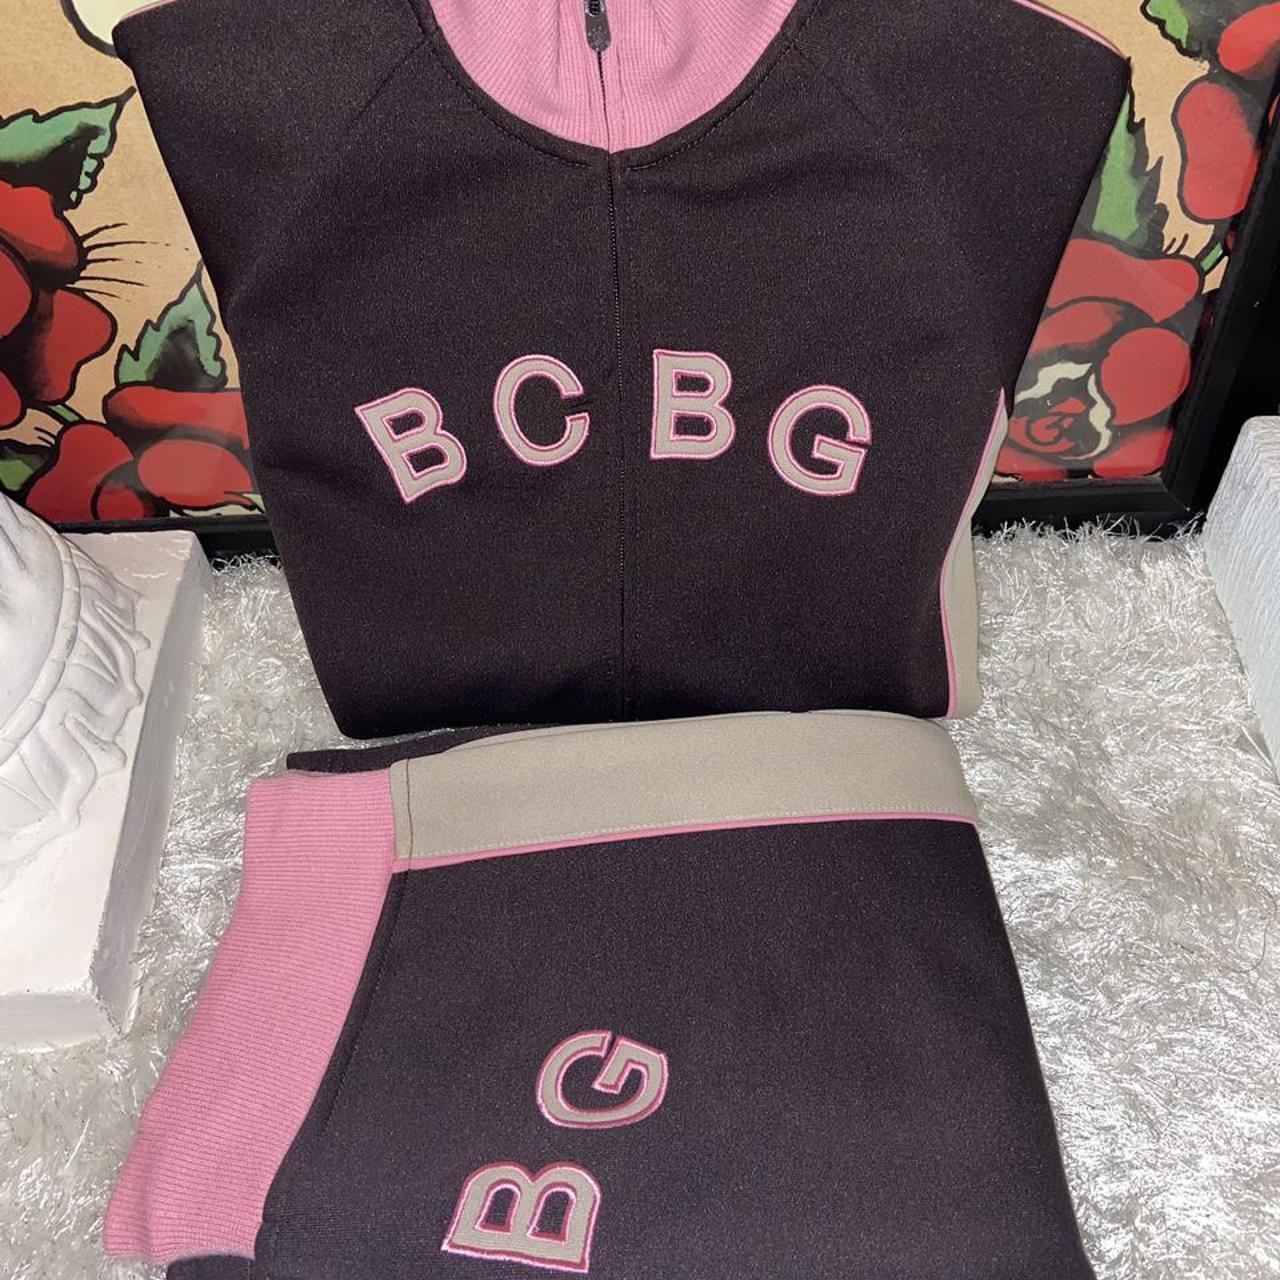 Product Image 1 - BCBG(logo) Tracksuit/Set

❌Will Not Separate❌

Height: 5’2
Weight: